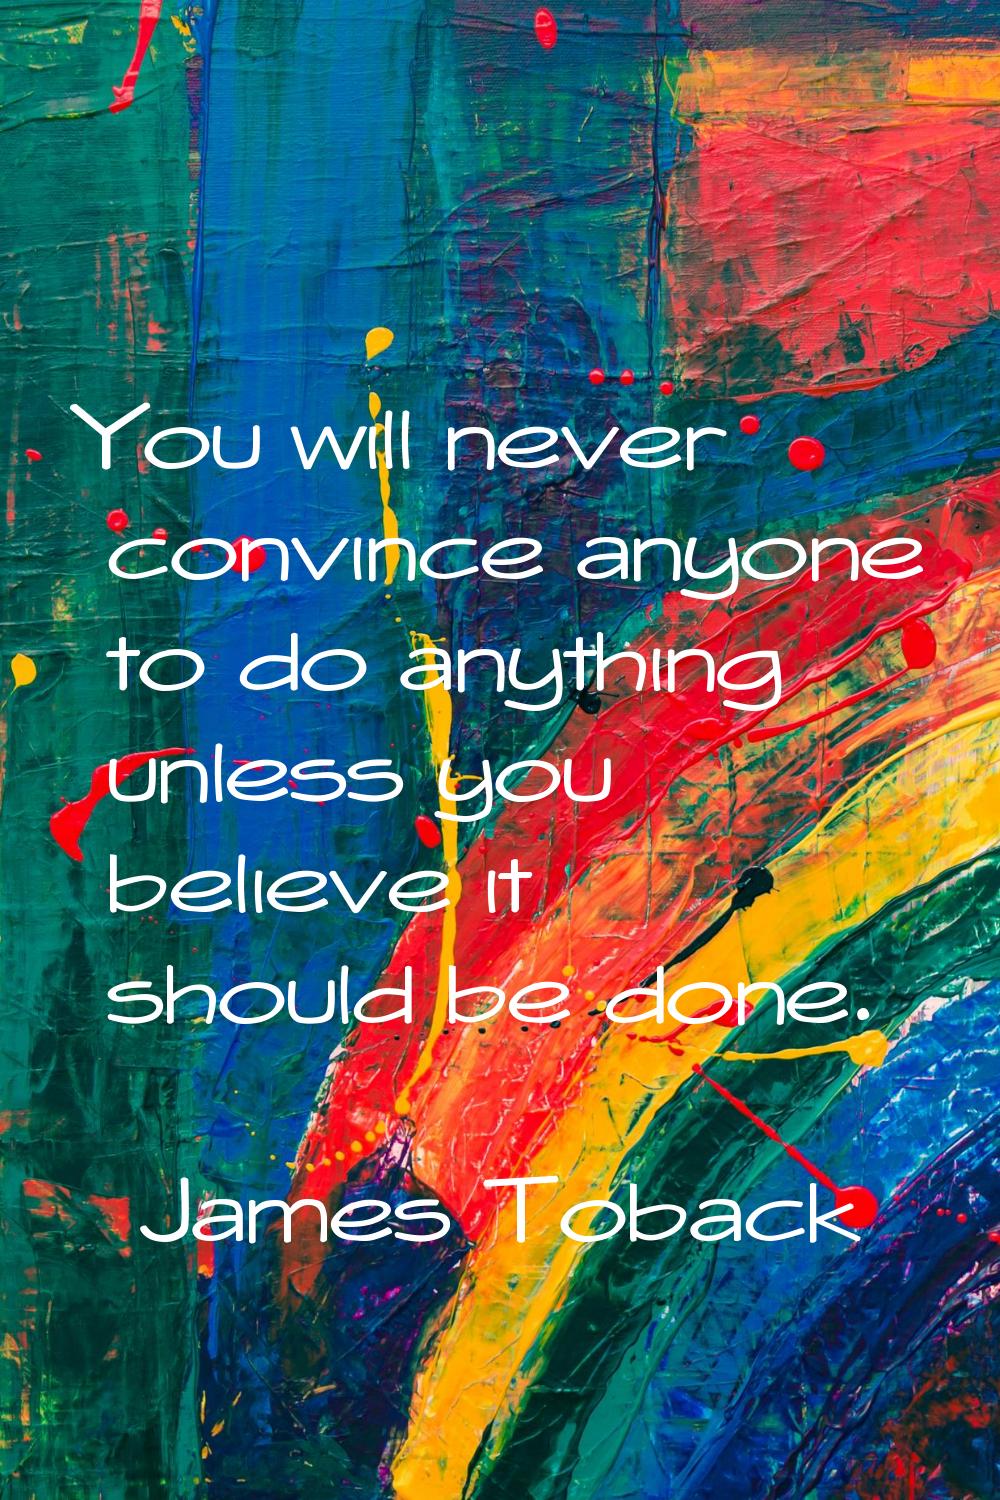 You will never convince anyone to do anything unless you believe it should be done.